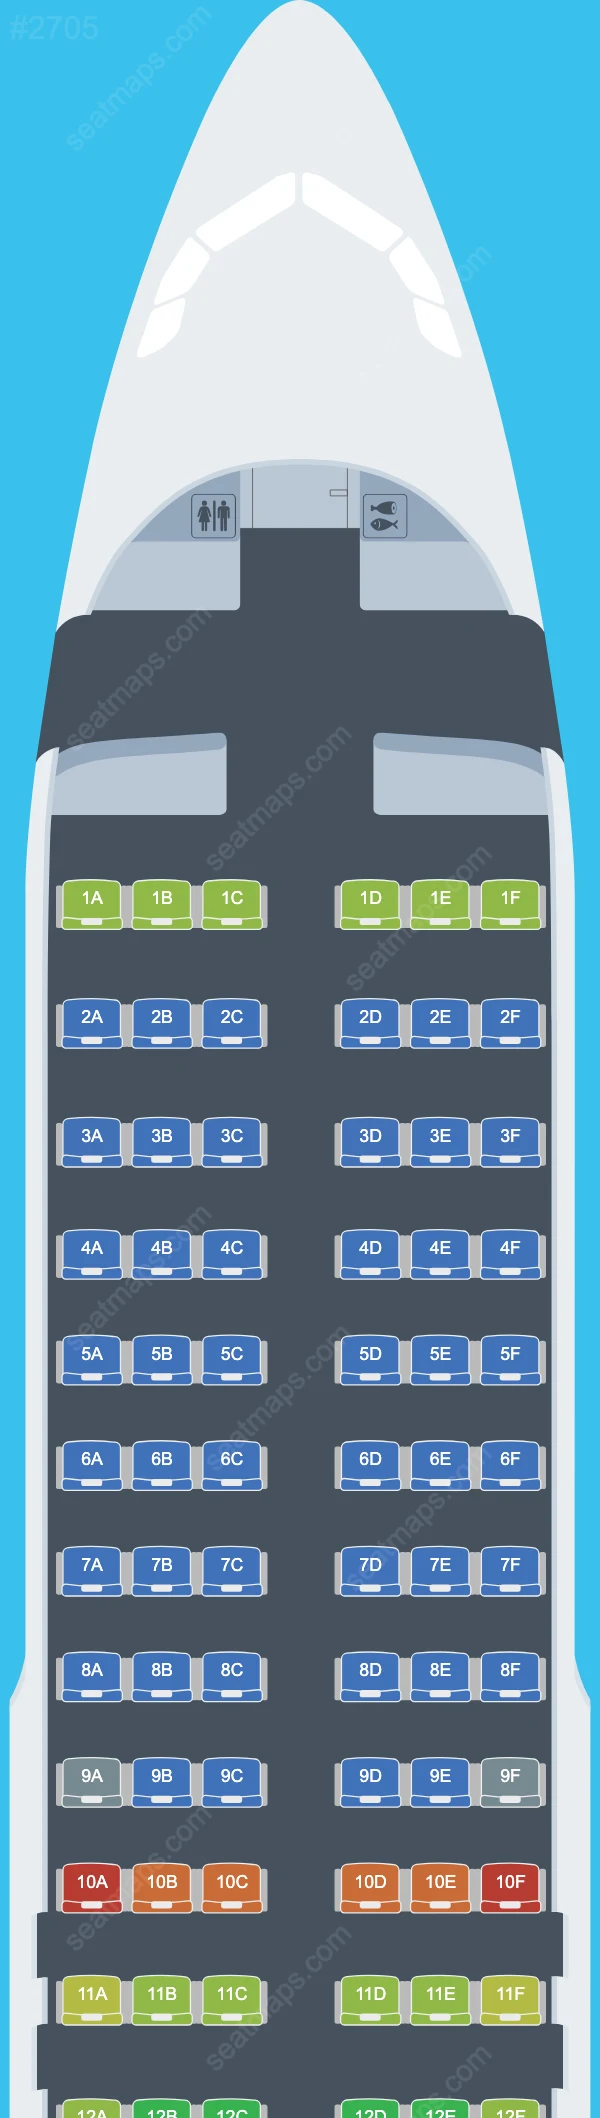 LATAM Airlines Airbus A320 Seat Maps A320-200 V.3